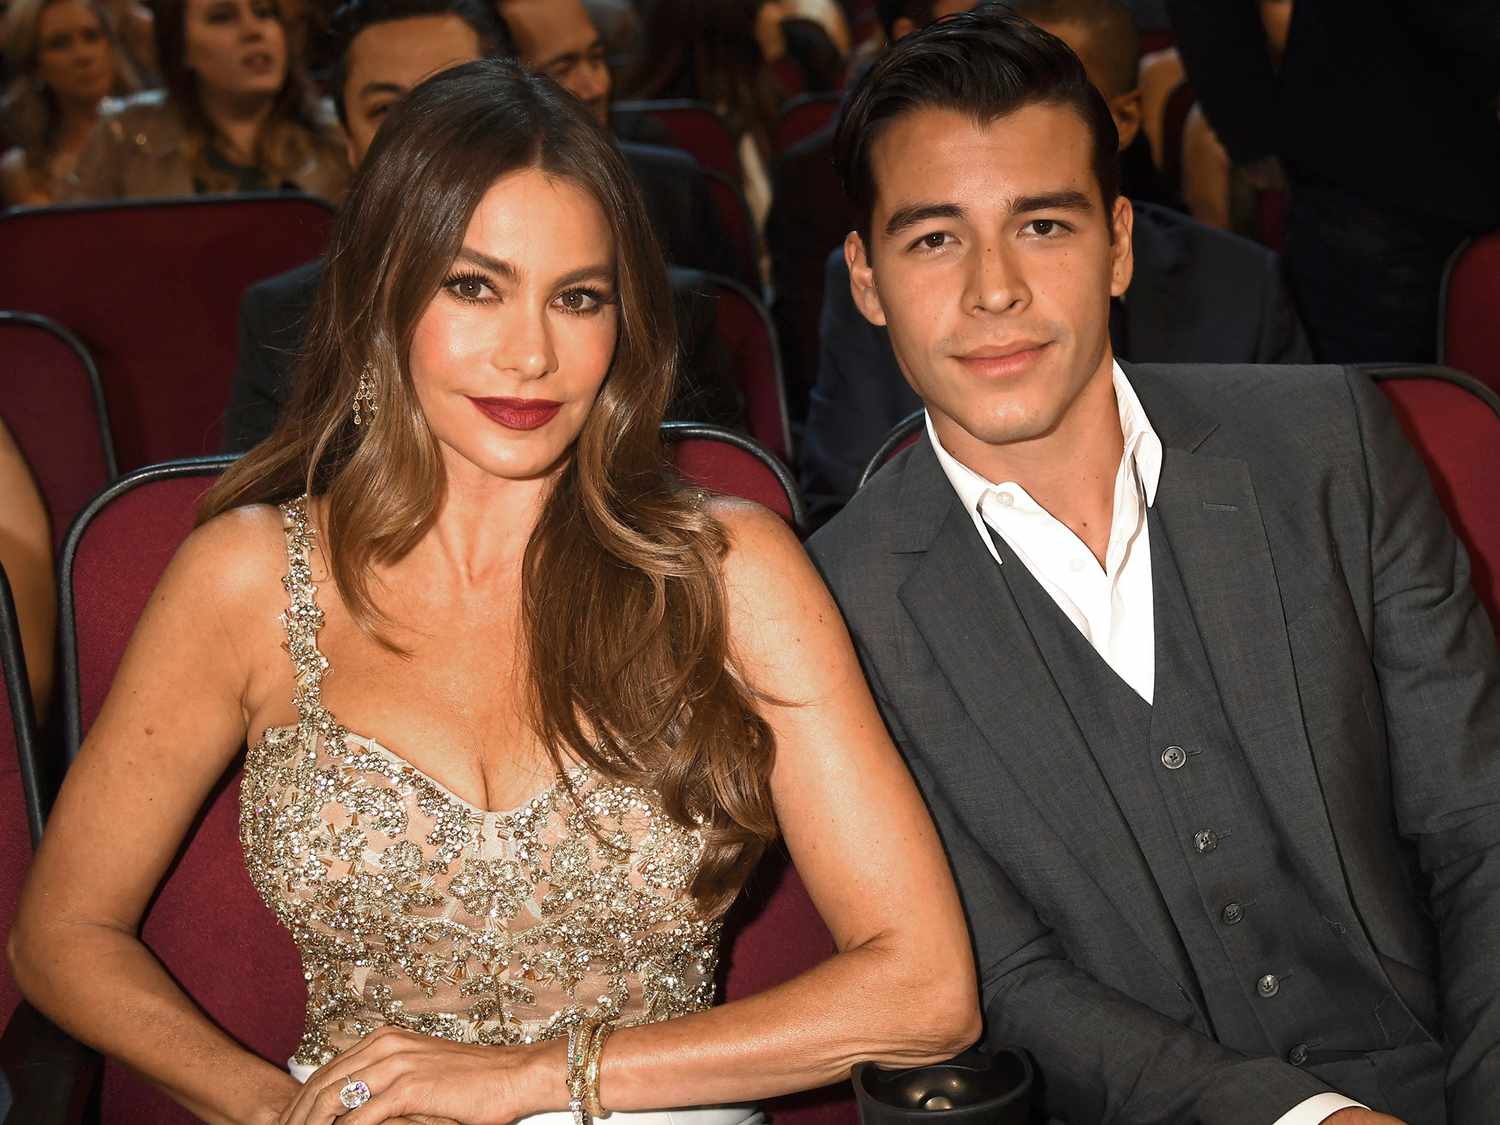 Sofia Vergara Says Son Manolo's 'Old Soul' and 'Weird Things' Inspired Manny from 'Modern Family'